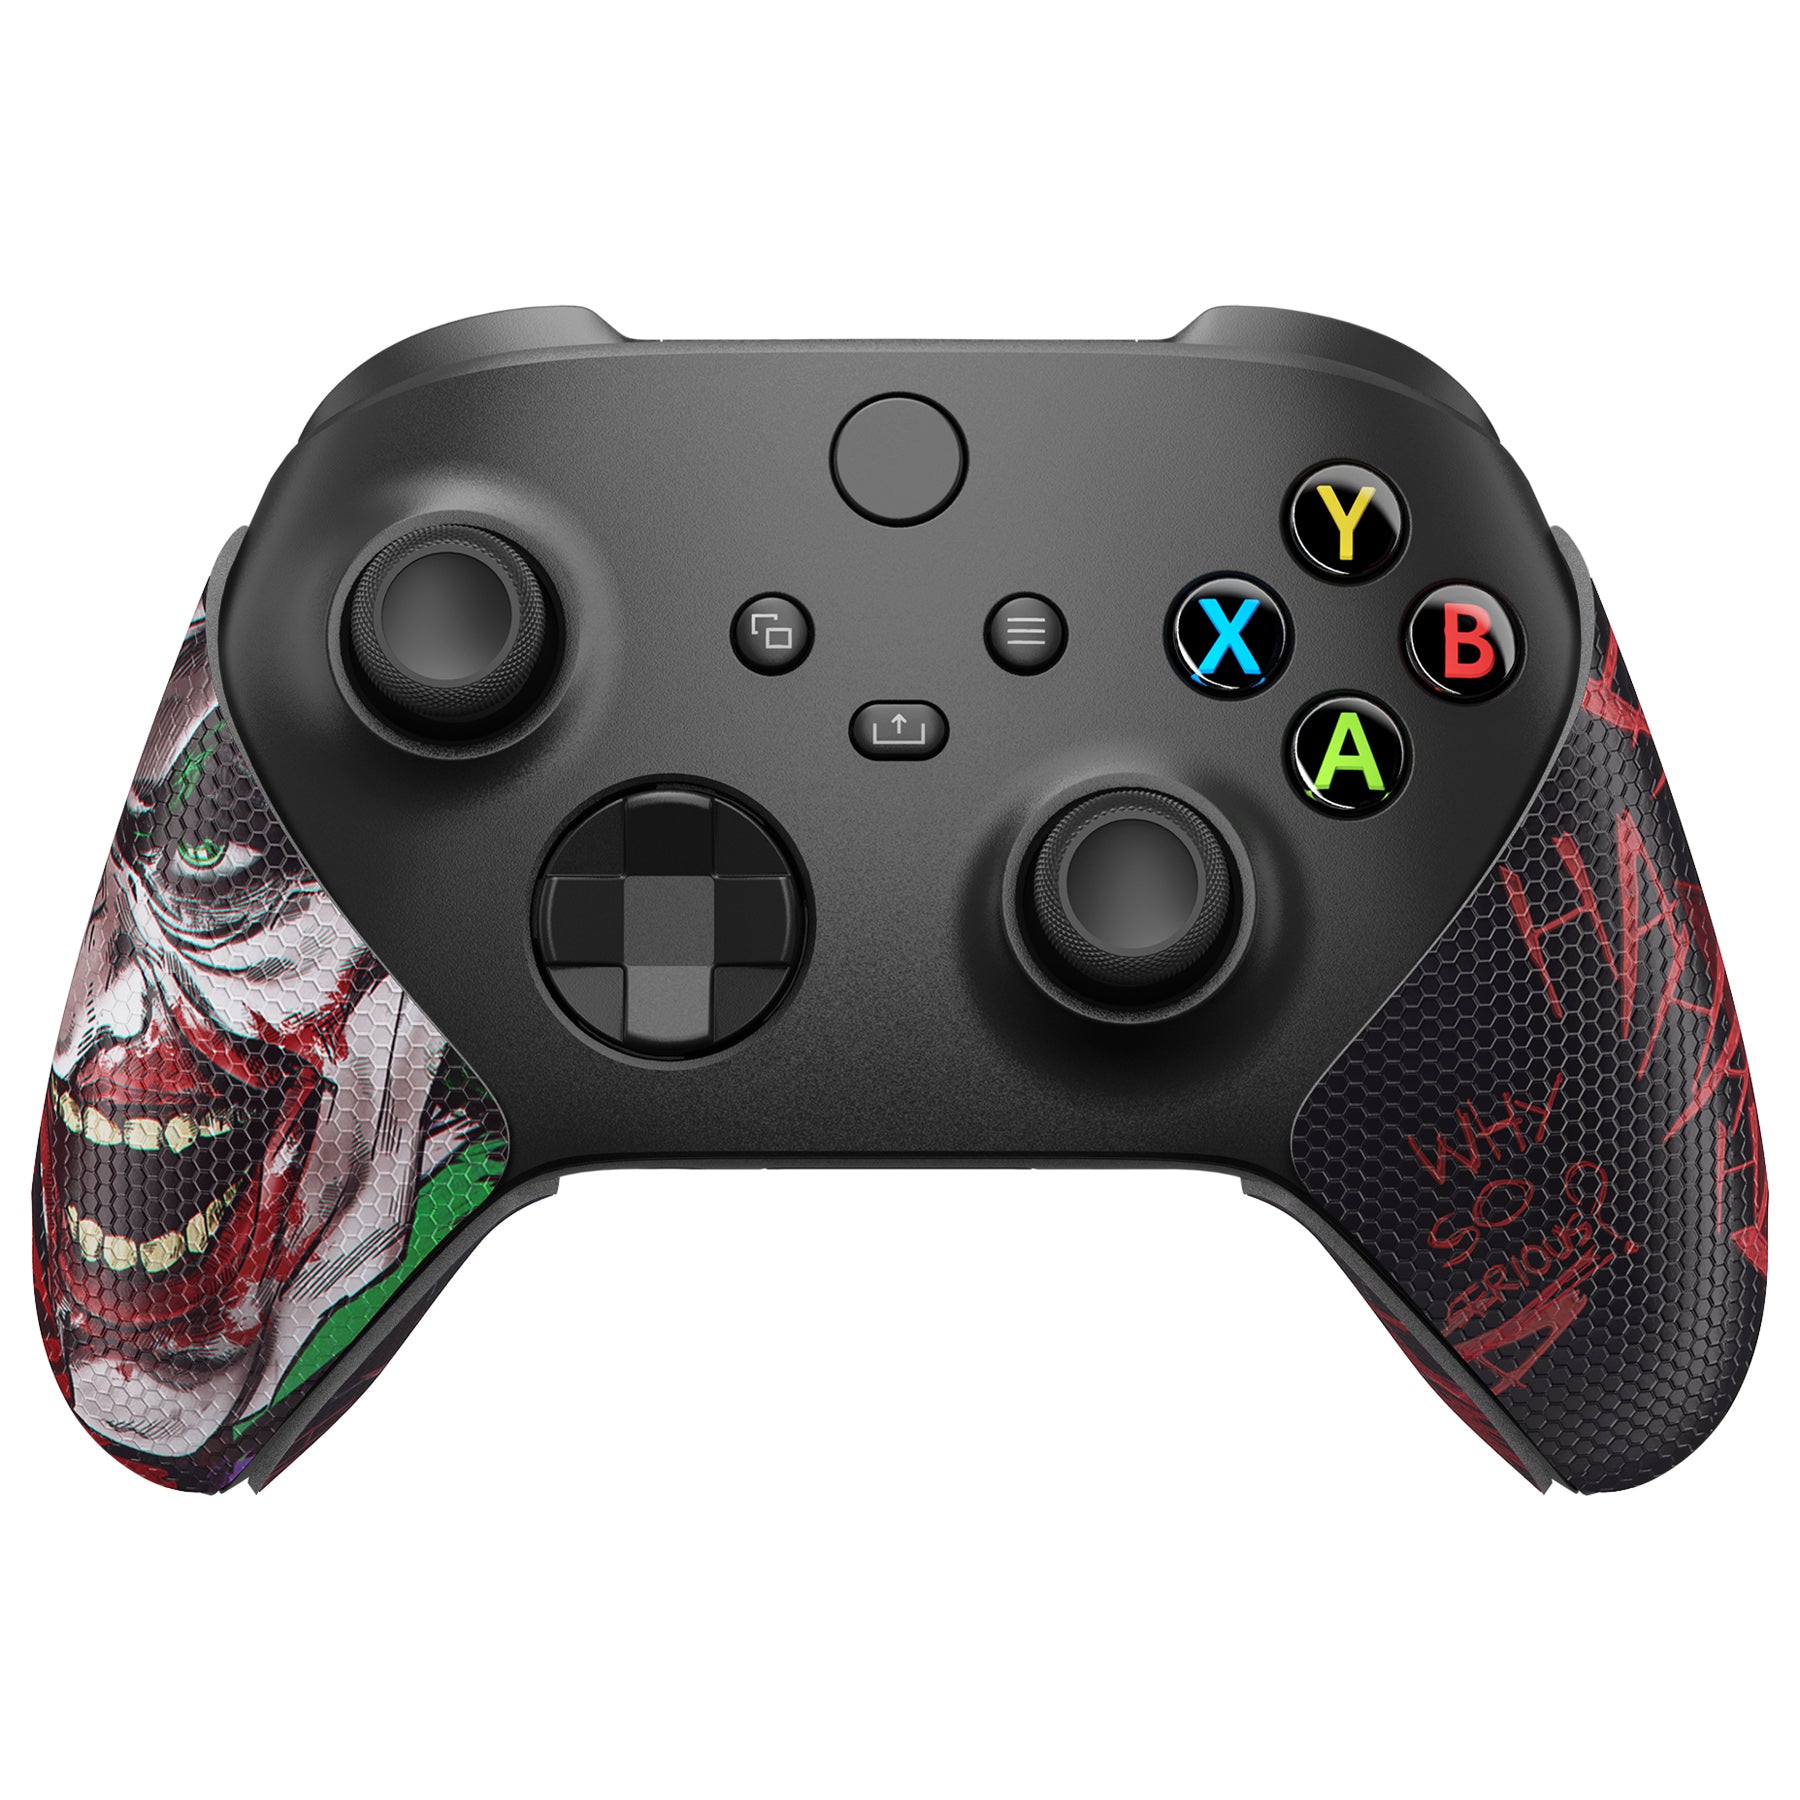 what are the xbox controls for demon fall｜TikTok Search